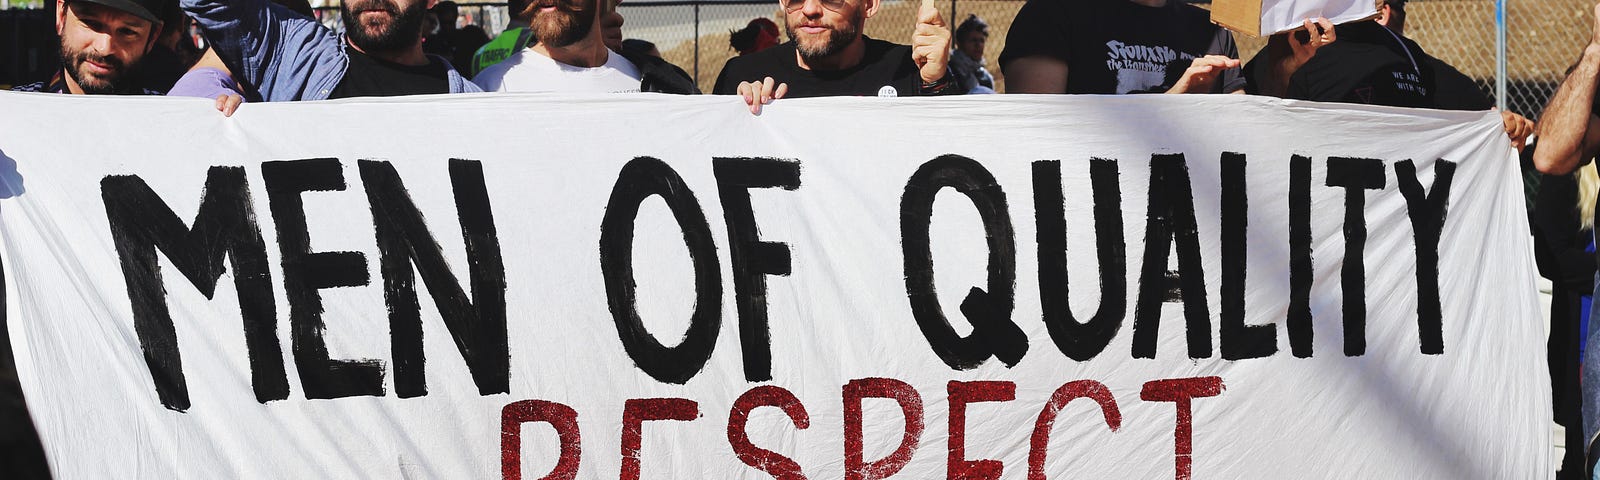 A group of men holding a banner proclaiming “Men of Quality Respect Women’s Equality”. Lashing back against the overturning of Roe vs Wade in the United States, and marching in favor of women’s rights.